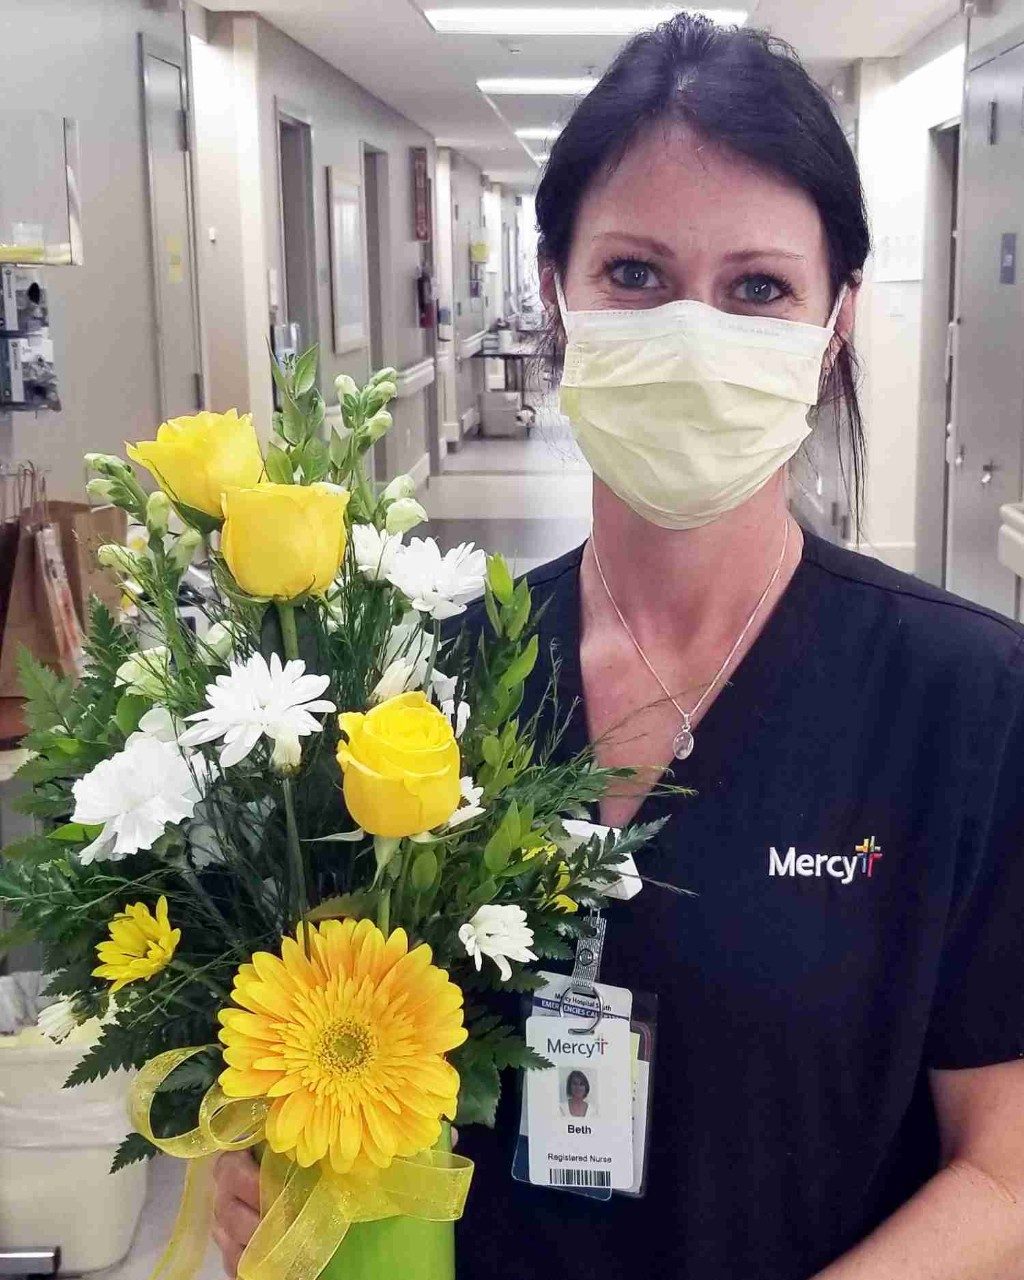 Beth Patrick, RN, earned the DAISY Award for the extraordinary, compassionate and skillful nursing care she provides at Mercy Hospital South.